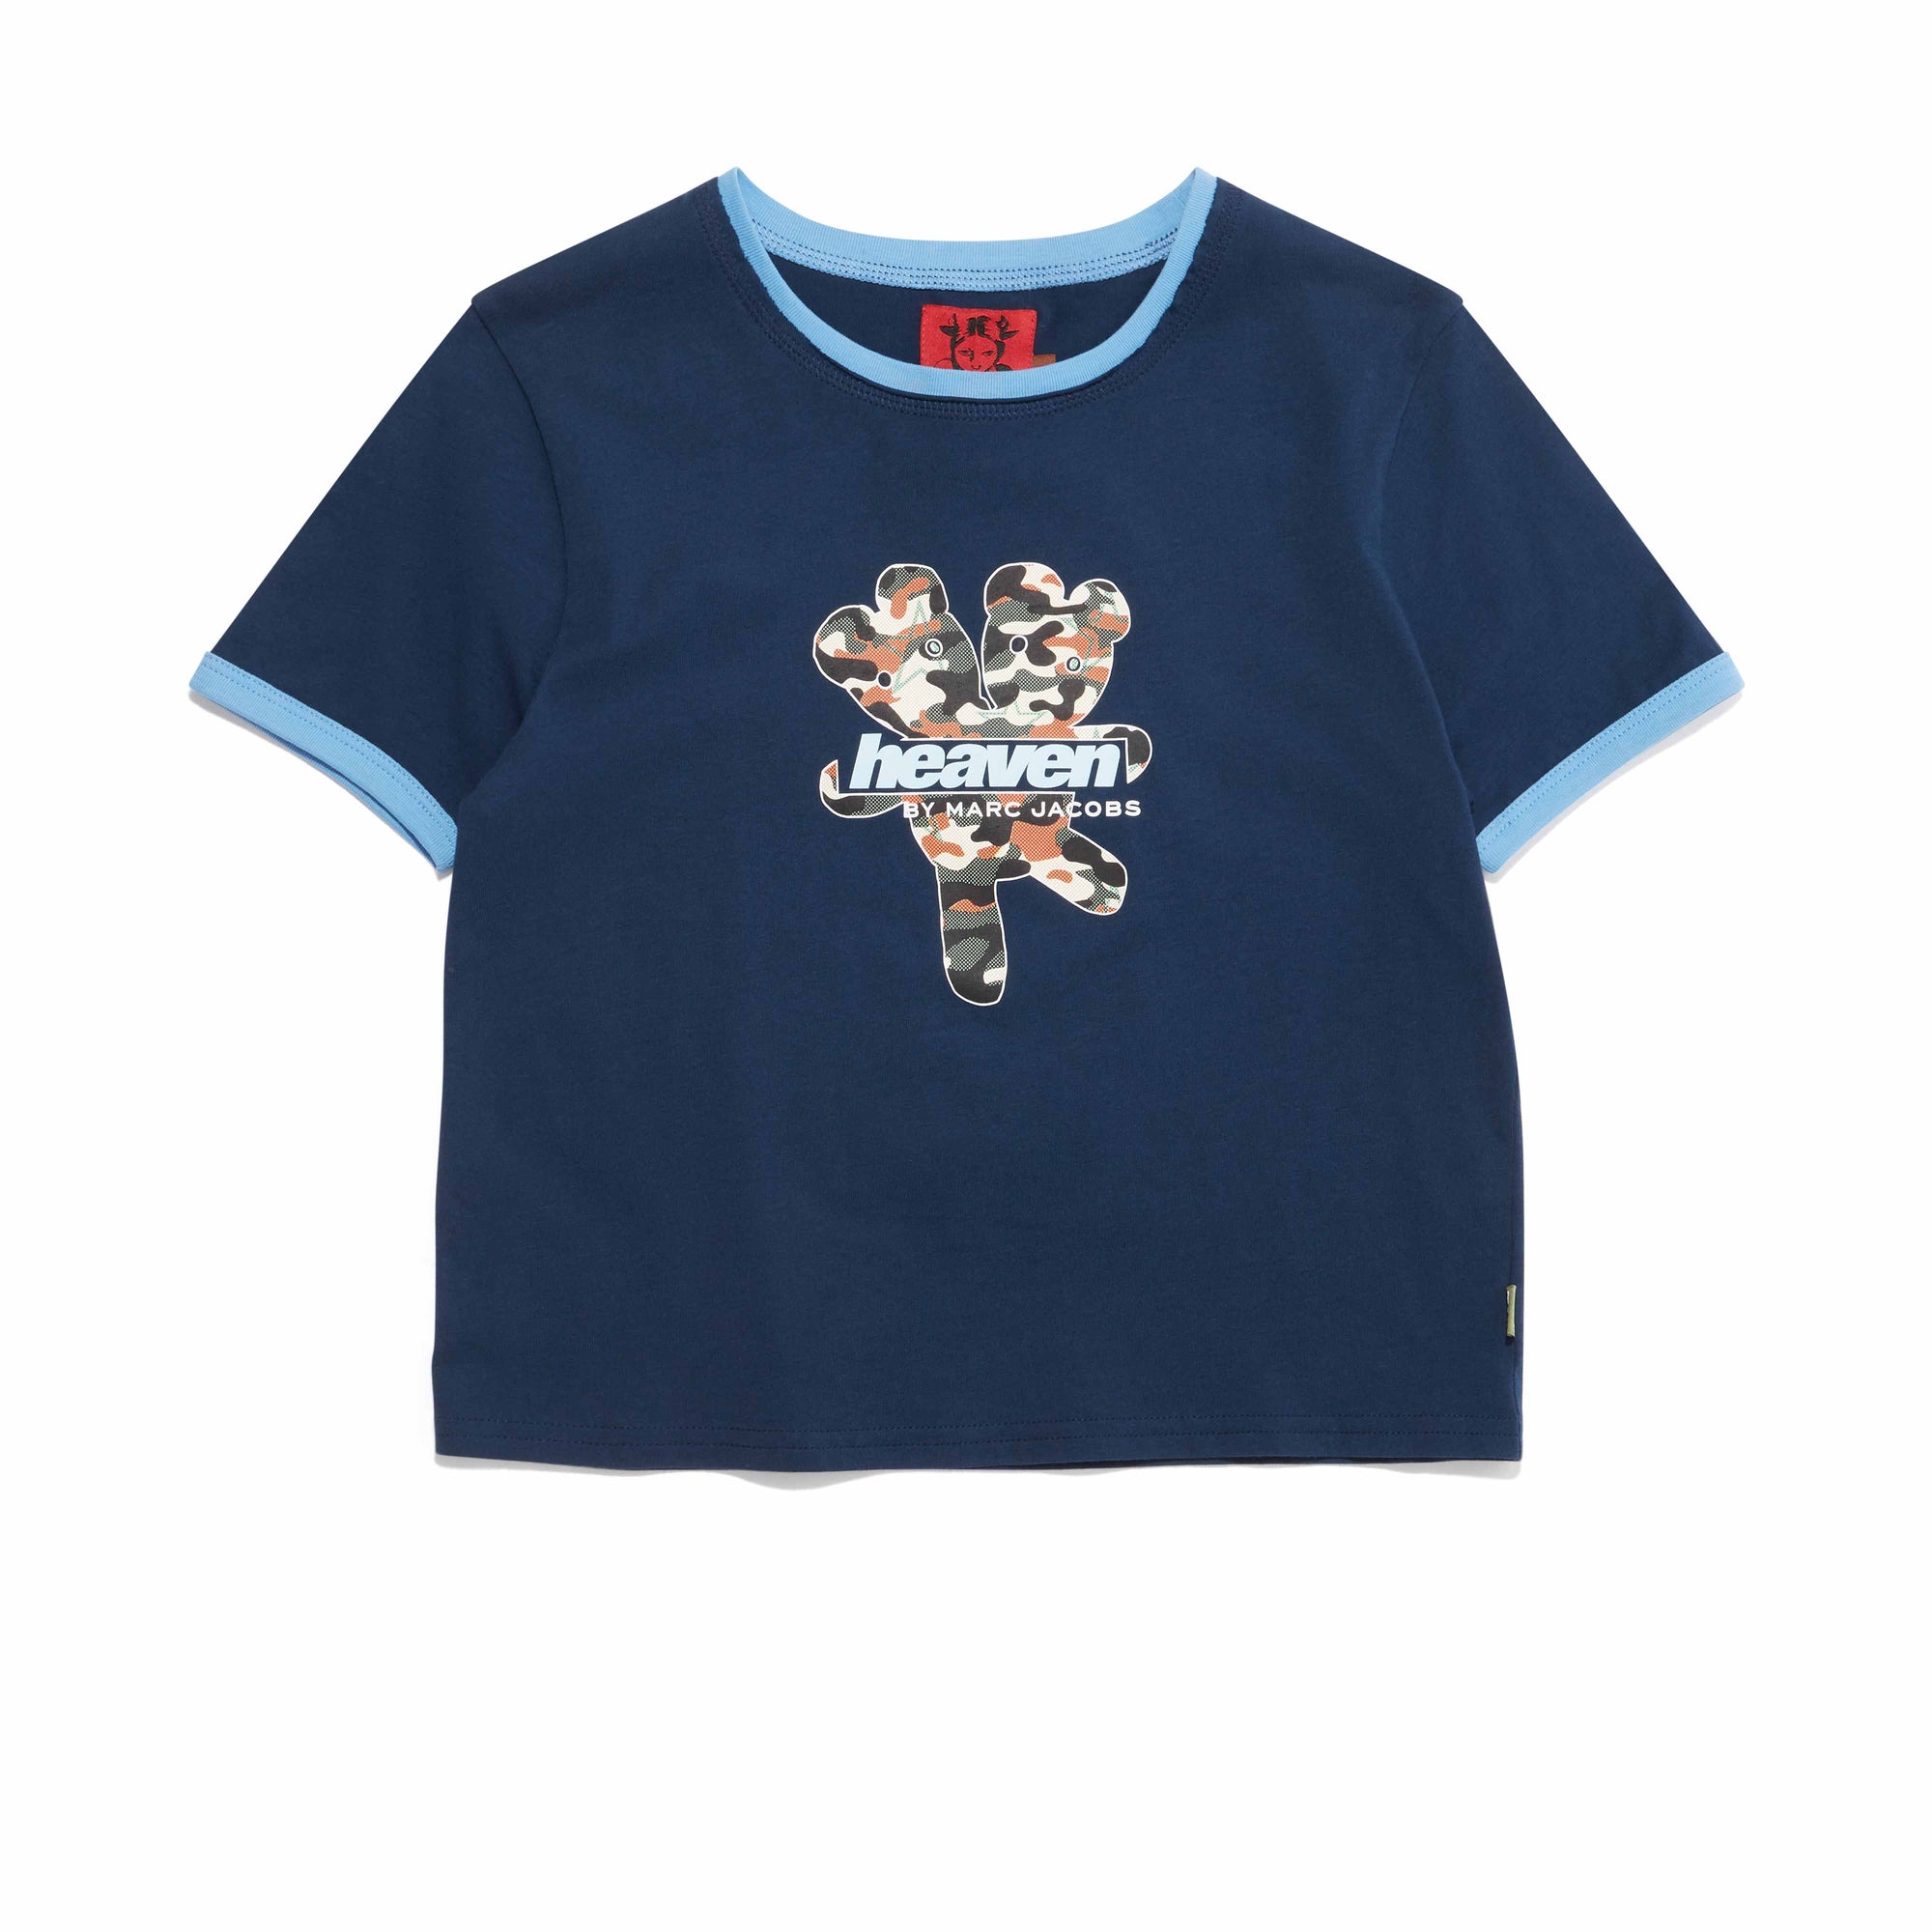 Heaven by Marc Jacobs - Women’s Logo Baby Tee - (Navy) view 1